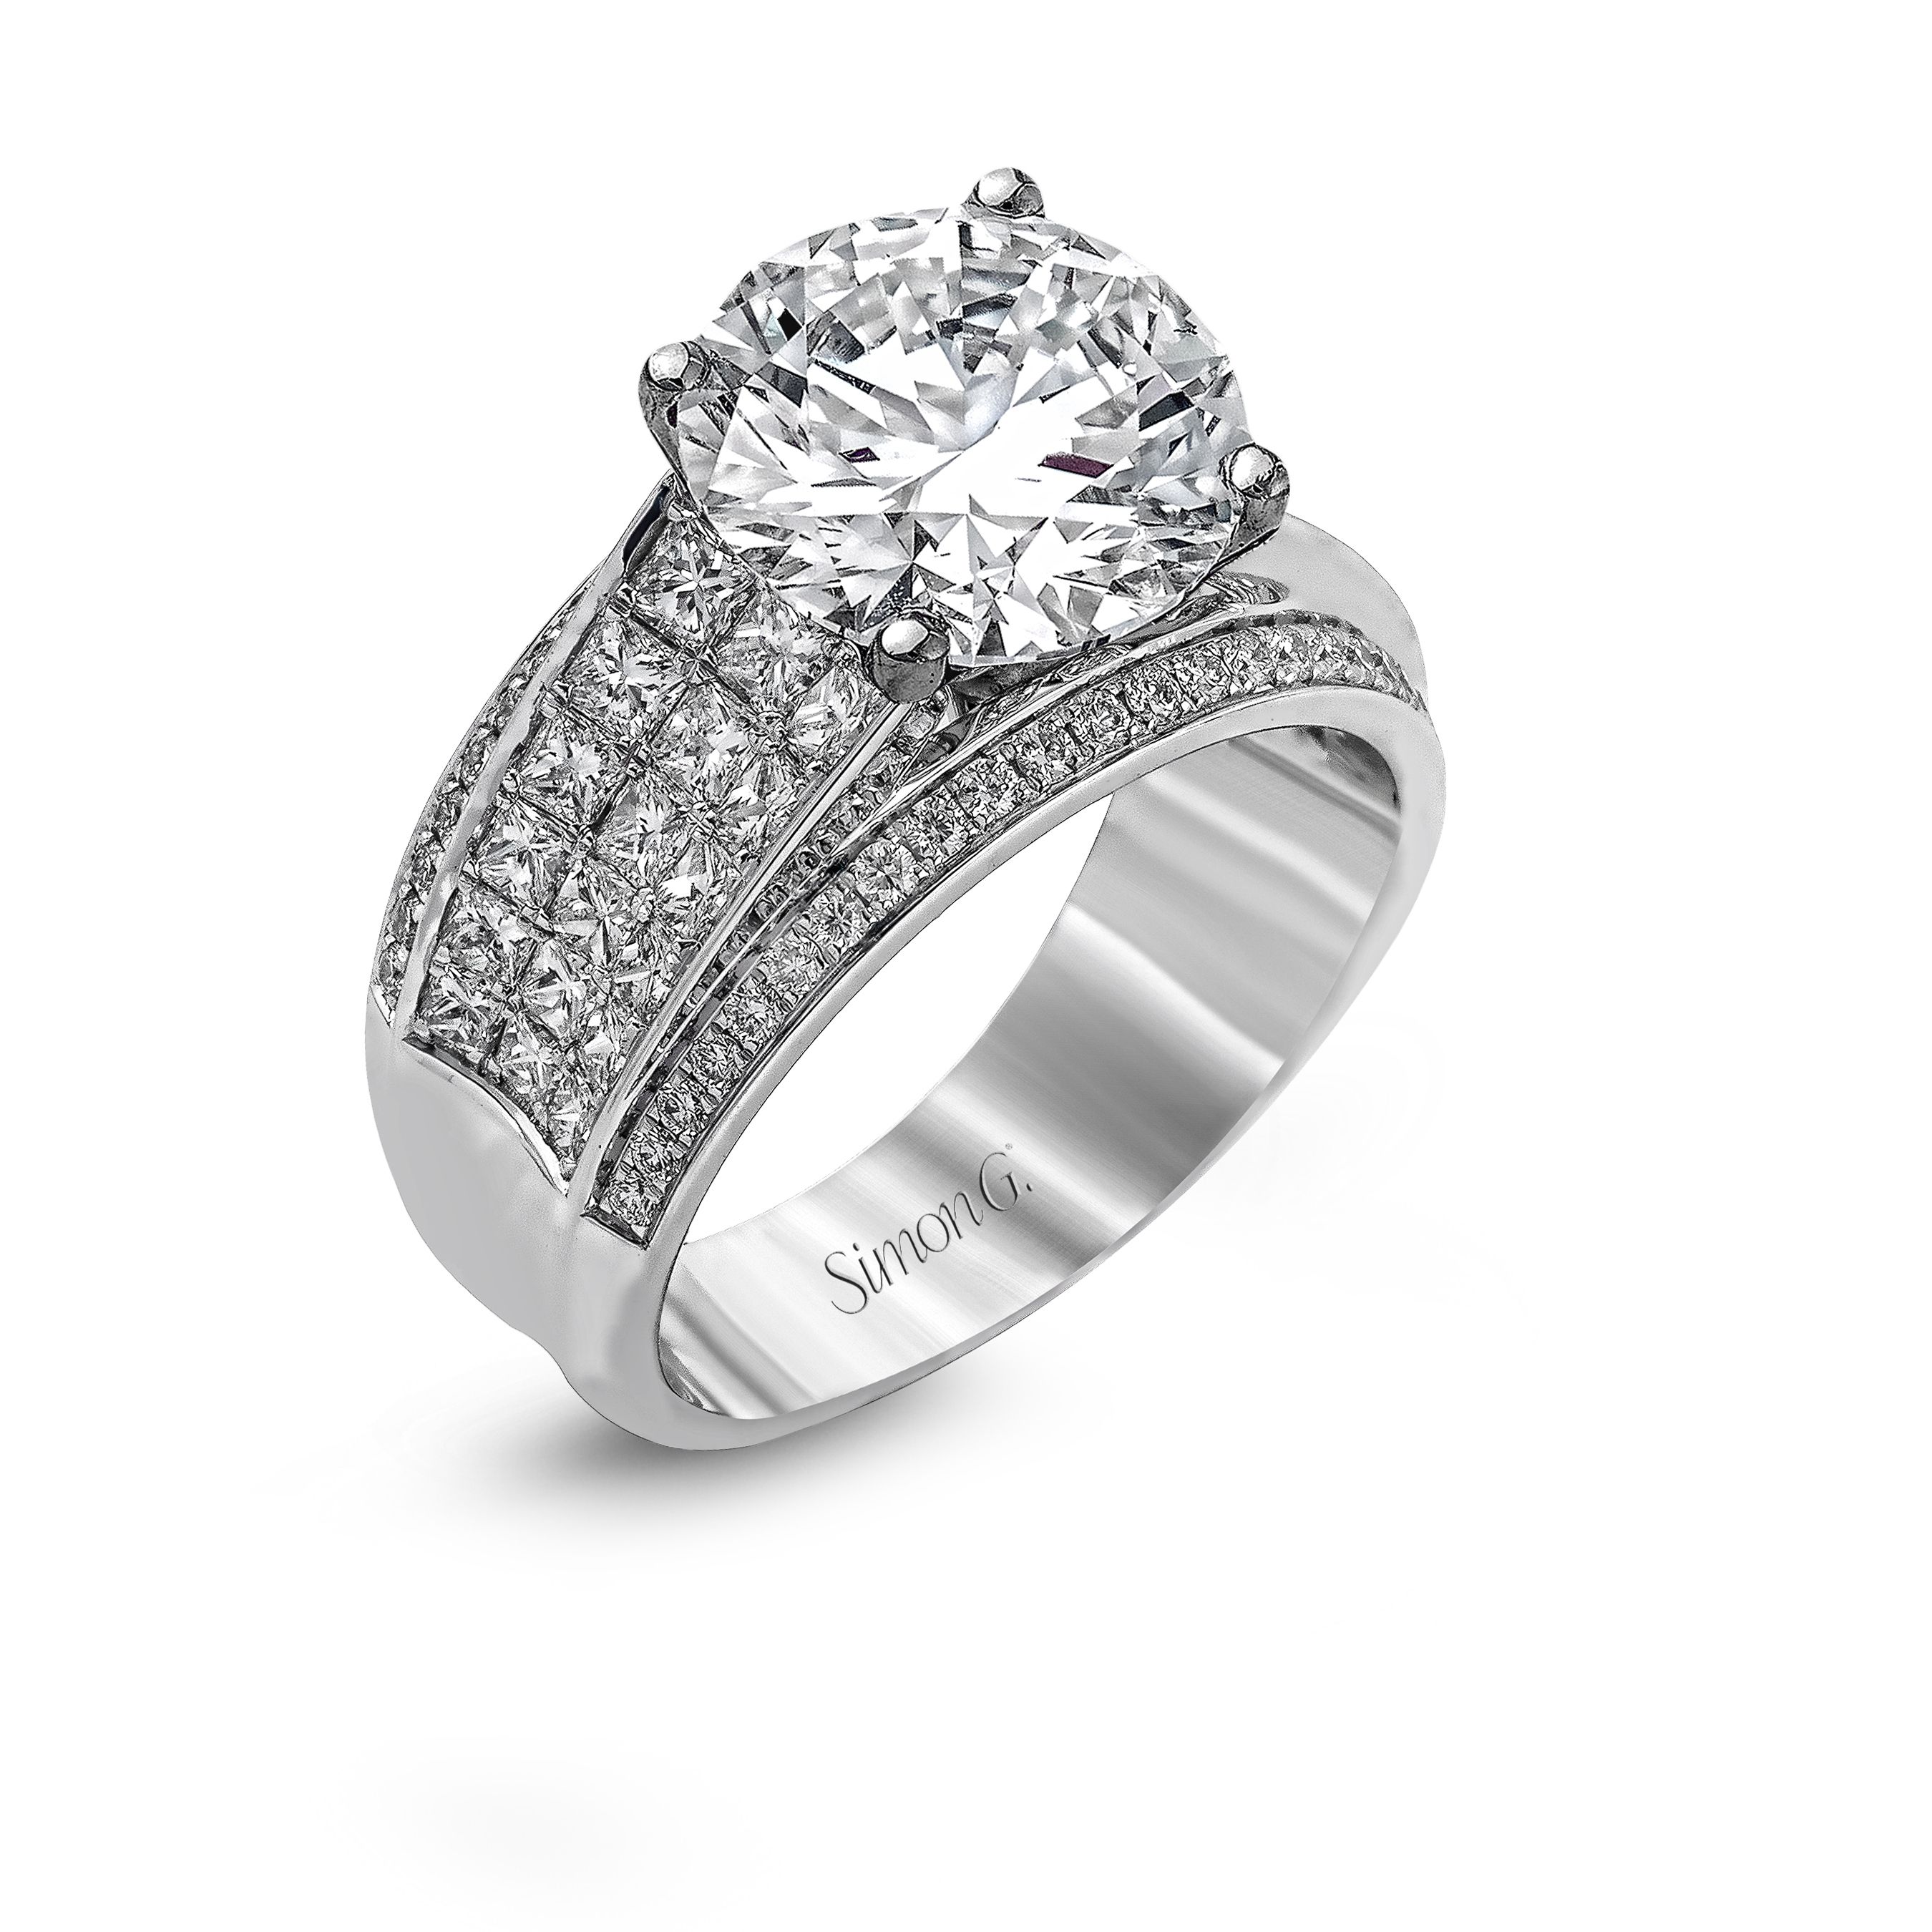 MR2141 Nocturnal Sophistication Collection Platinum Round Cut Engagement Ring